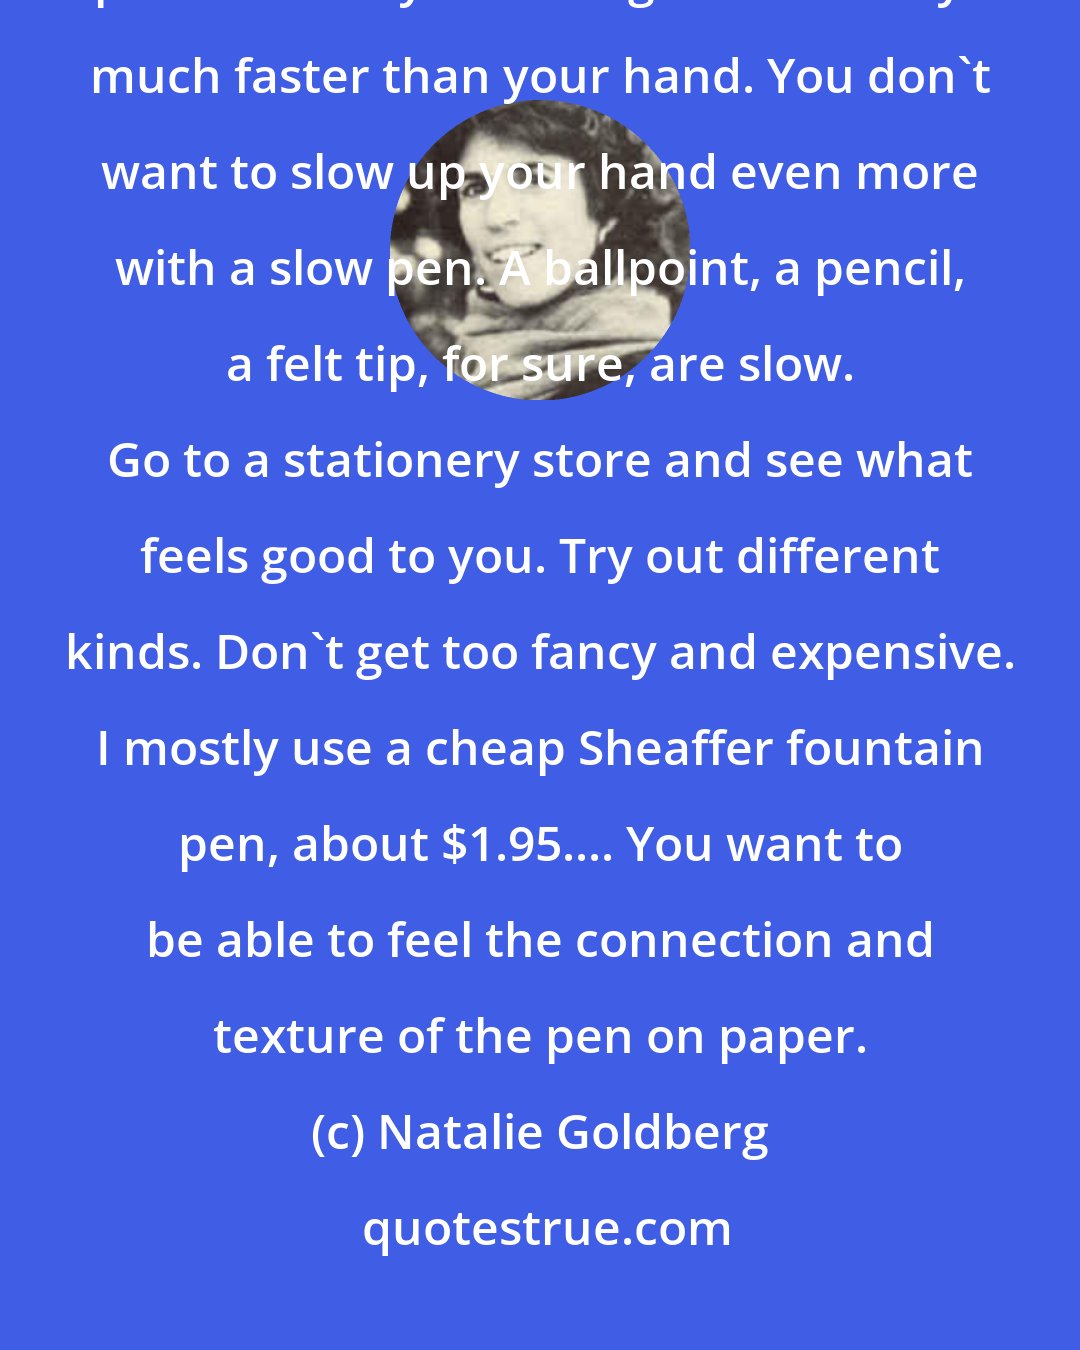 Natalie Goldberg: First, consider the pen you write with. It should be a fast-writing pen because your thoughts are always much faster than your hand. You don't want to slow up your hand even more with a slow pen. A ballpoint, a pencil, a felt tip, for sure, are slow. Go to a stationery store and see what feels good to you. Try out different kinds. Don't get too fancy and expensive. I mostly use a cheap Sheaffer fountain pen, about $1.95.... You want to be able to feel the connection and texture of the pen on paper.